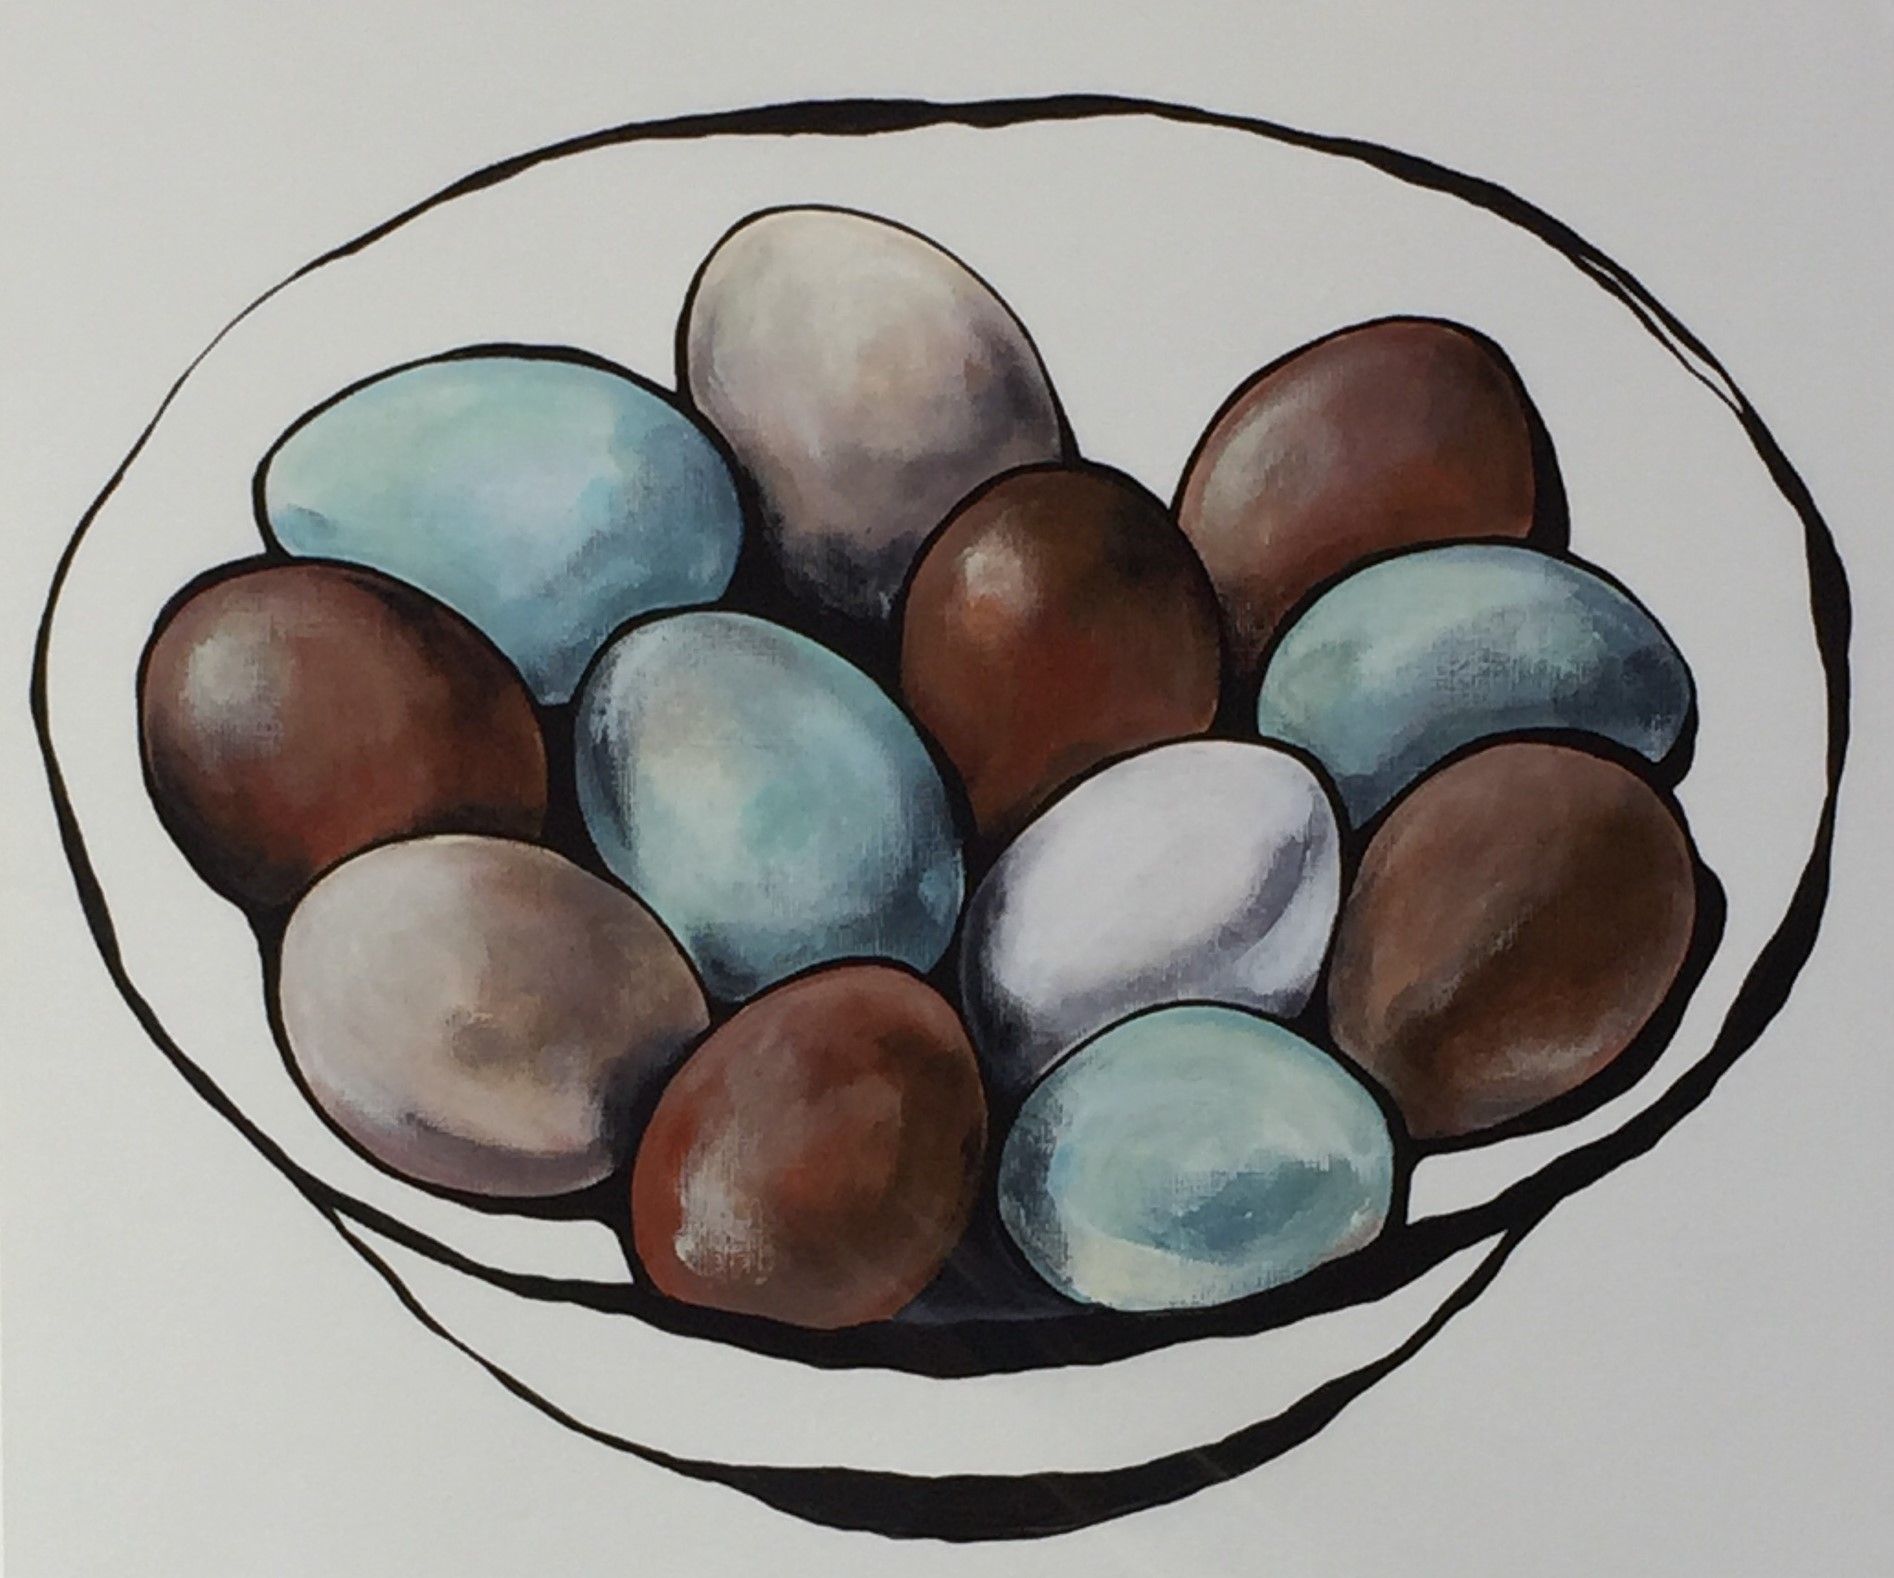 Susie's Eggs by Lucy Routh